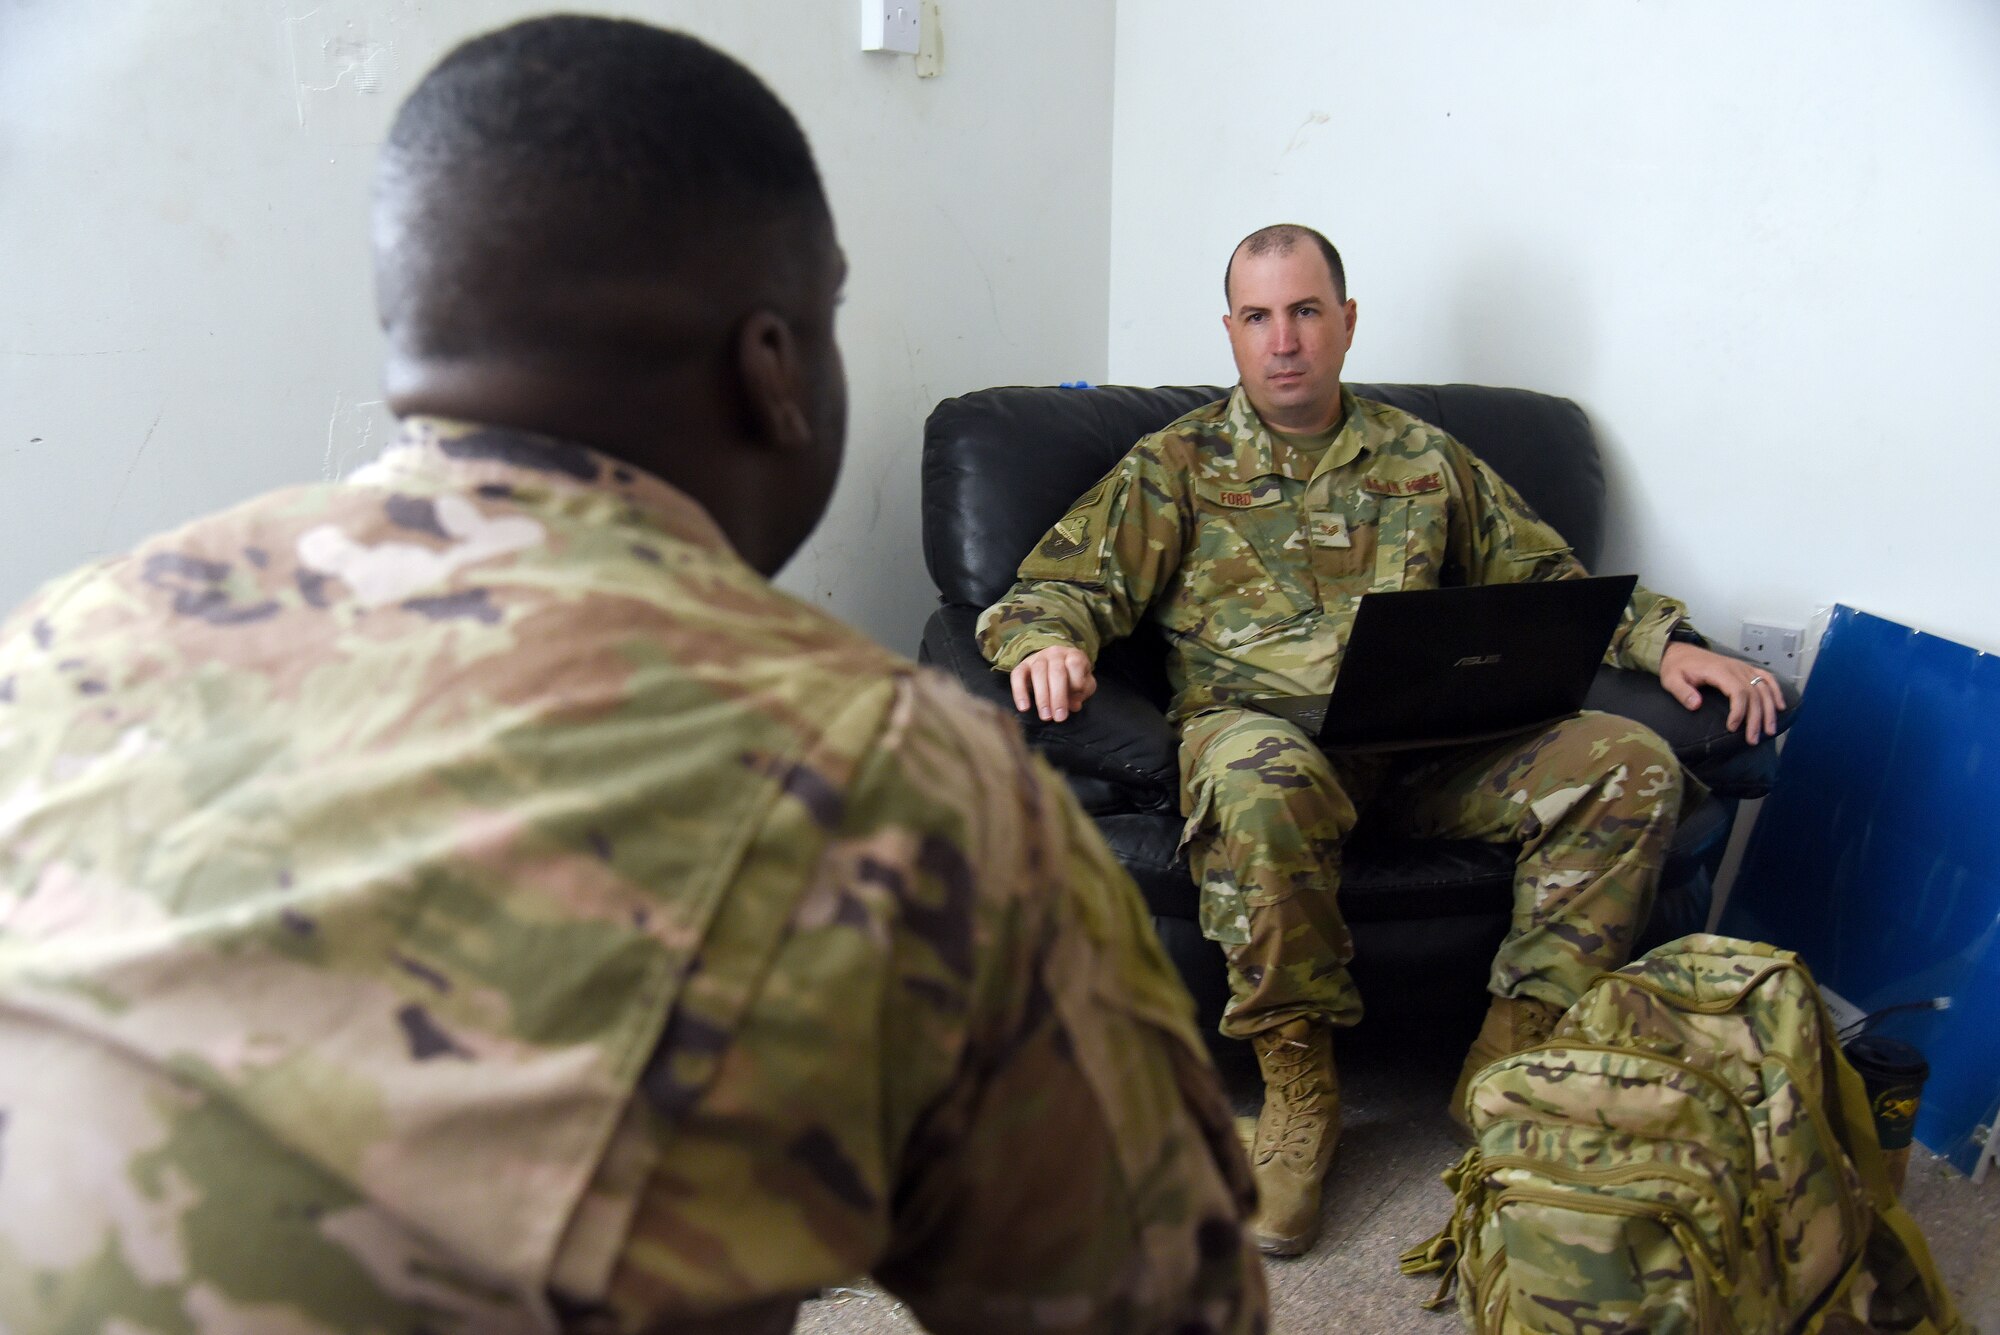 Staff Sgt. Christopher Ford, 379th Air Expeditionary Wing equal opportunity noncommissioned officer in charge, conducts a one-on-on interview with service members at Al Dhafra Air Base, United Arab Emirates, Sept. 10, 2018. The mission of EO includes enforcing a zero tolerance policy for unlawful discrimination as well as fostering positive human relations environments across squadrons, groups and wings.